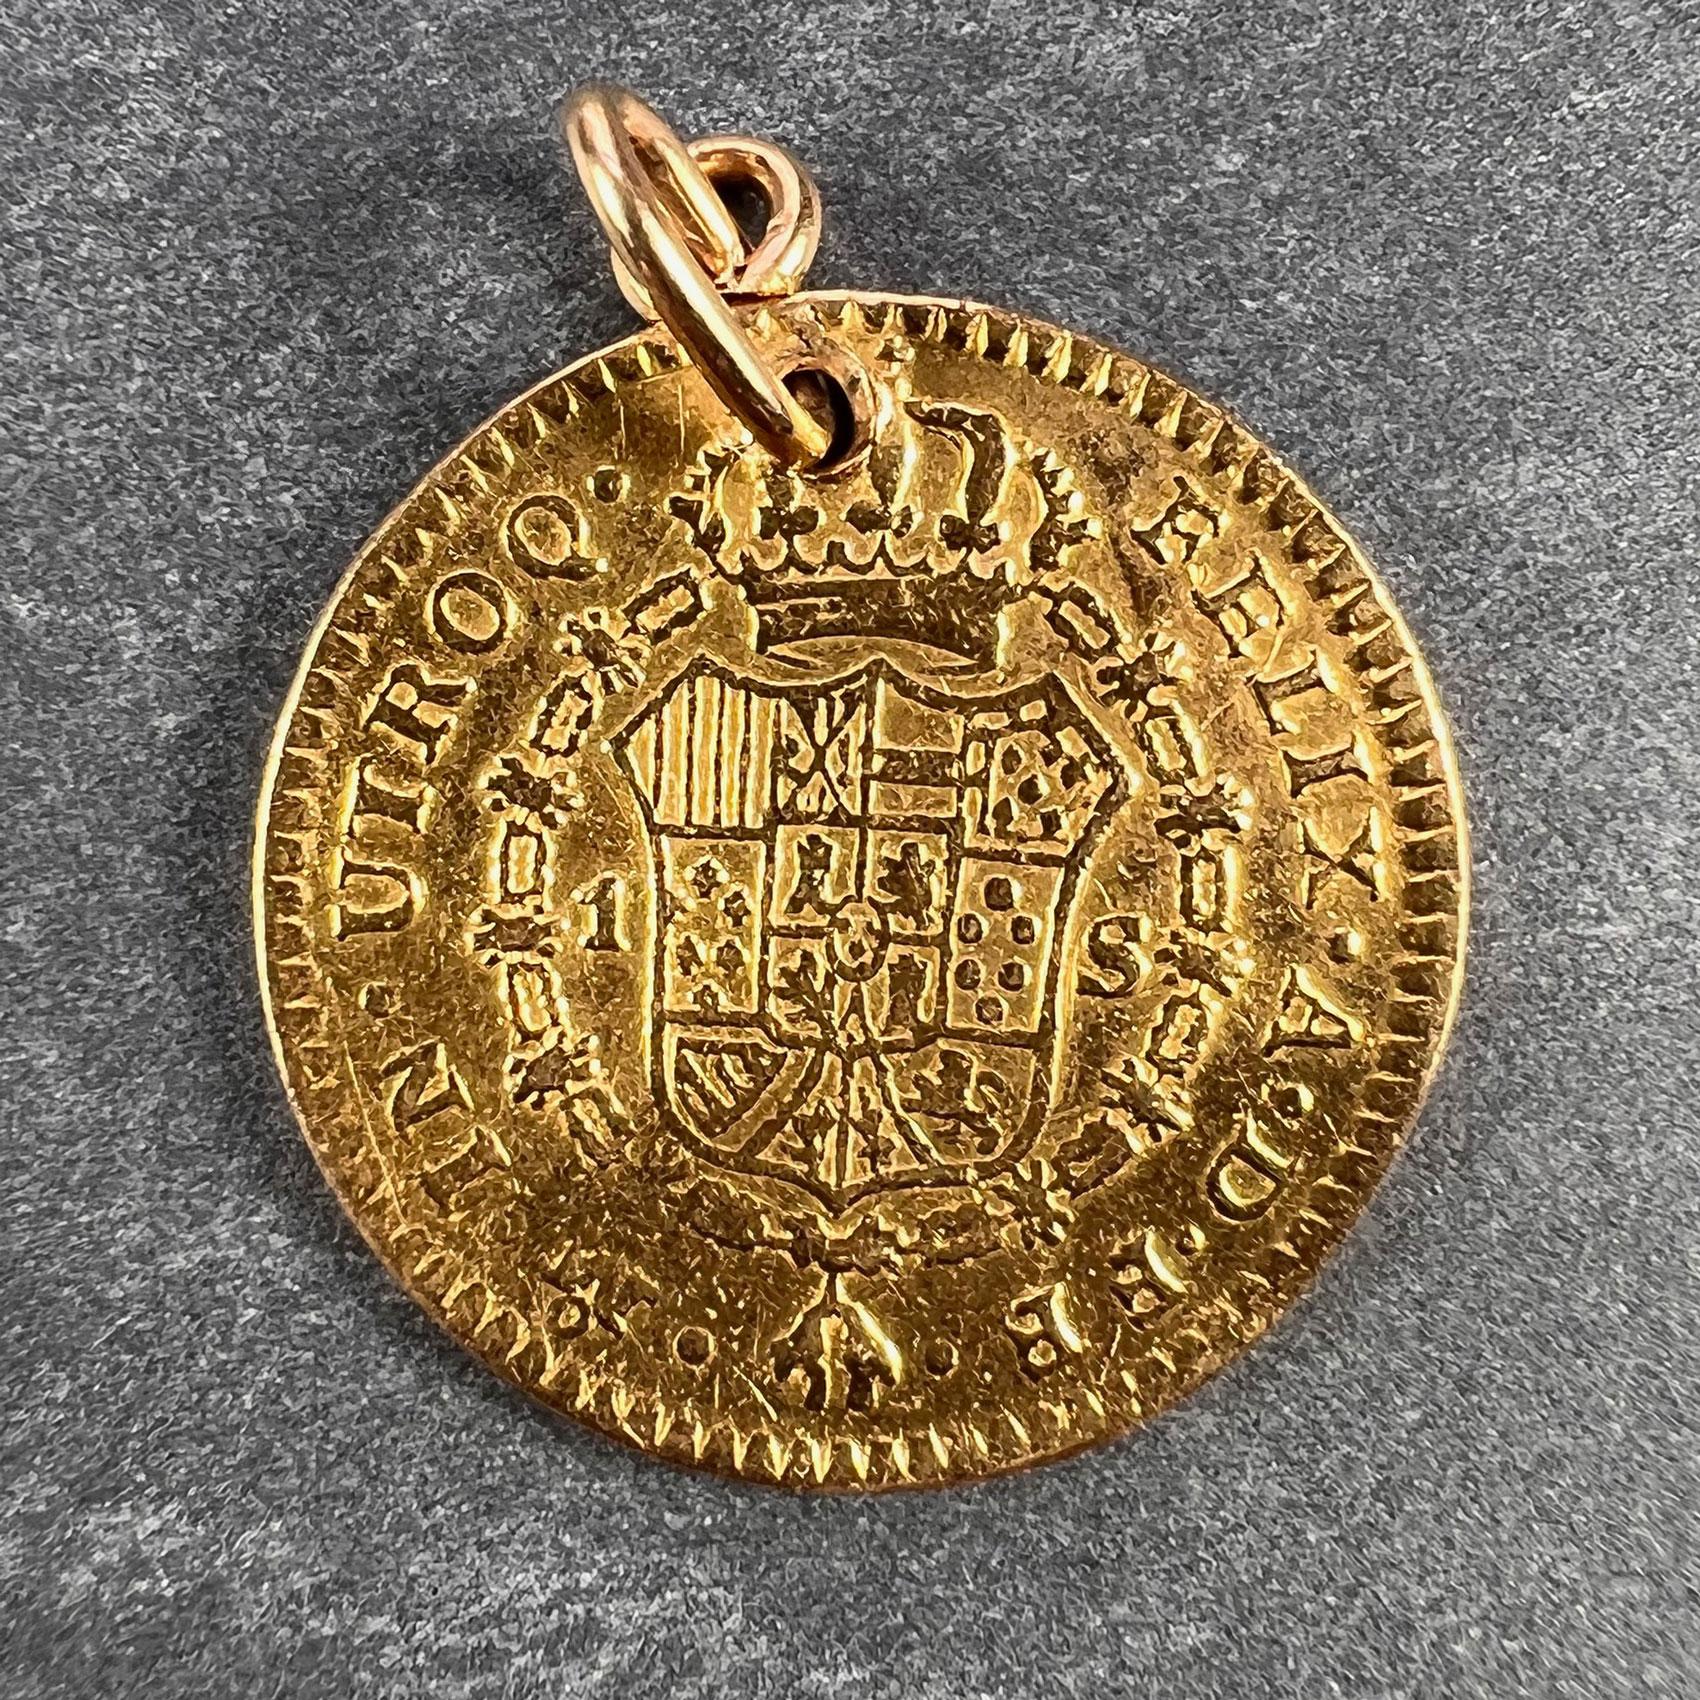 A 22 karat (22K) yellow gold charm pendant being a 1 Escudo coin dating from 1785 depicting Carlos III to one side and the arms of Spain to the other. Minted in the Royal Mint of Spain, Madrid. Drilled to be worn as a pendant.

Dimensions: 1.85 x